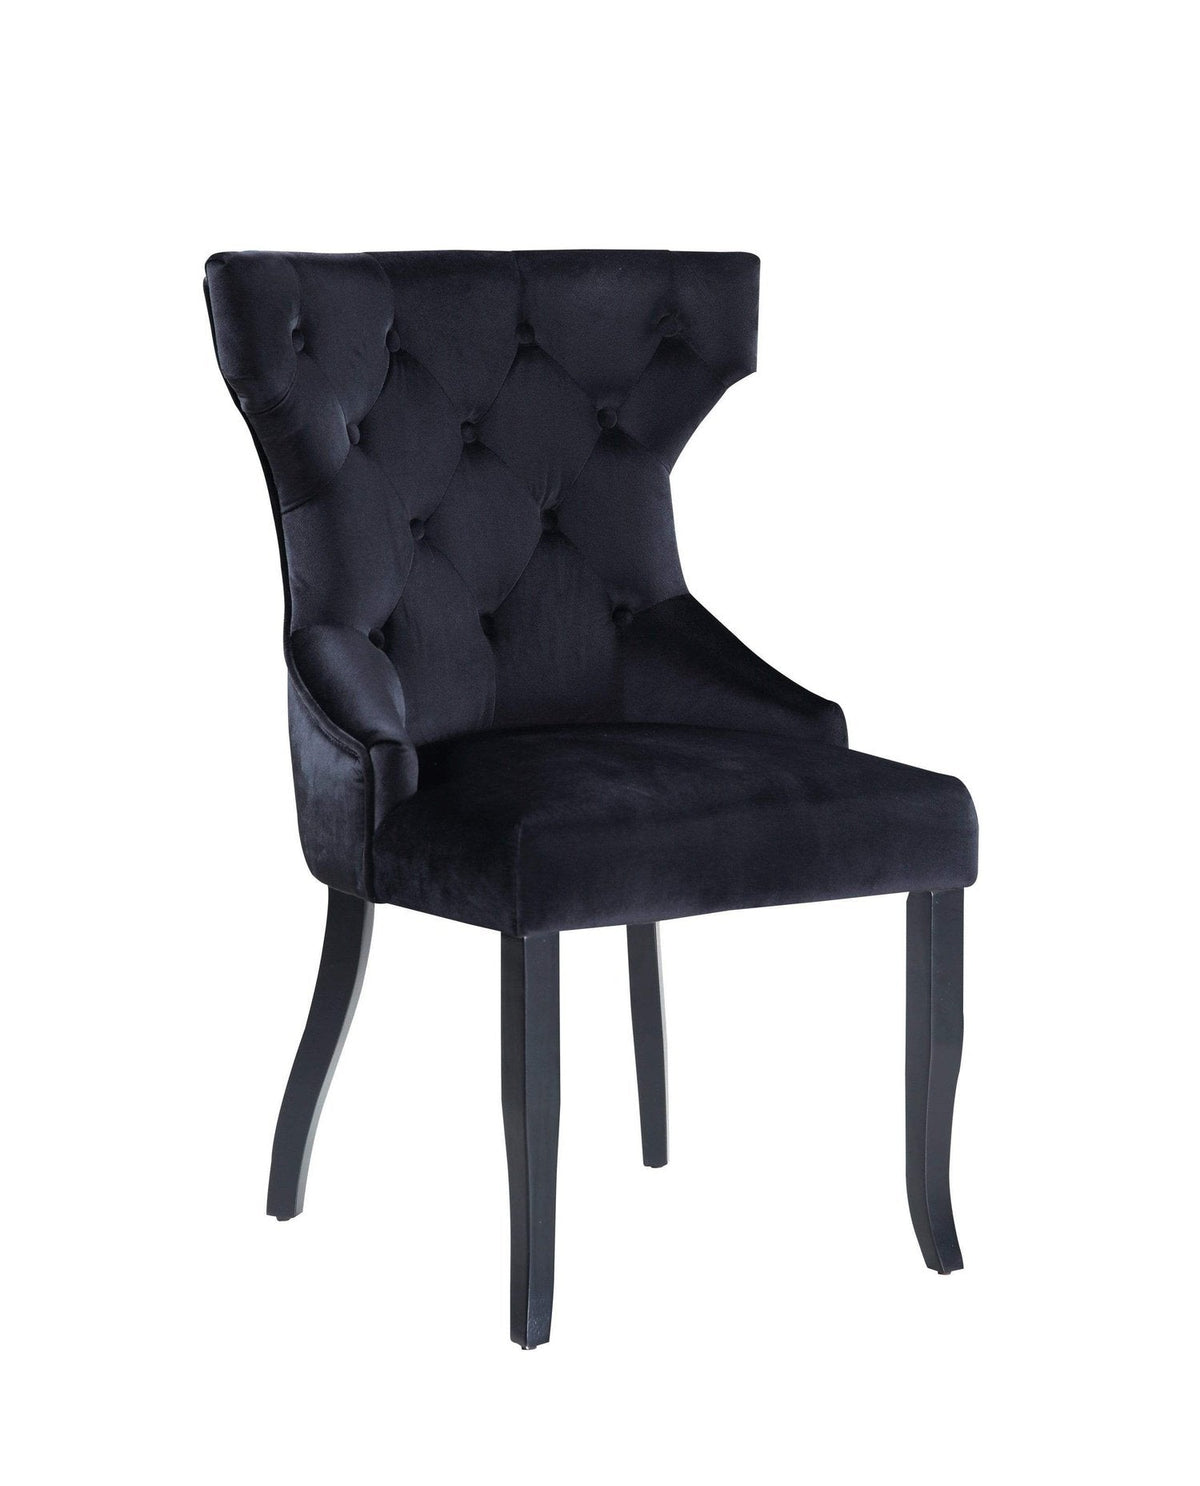 Iconic Home Naomi Tufted Velvet Dining Chair Set of 2 